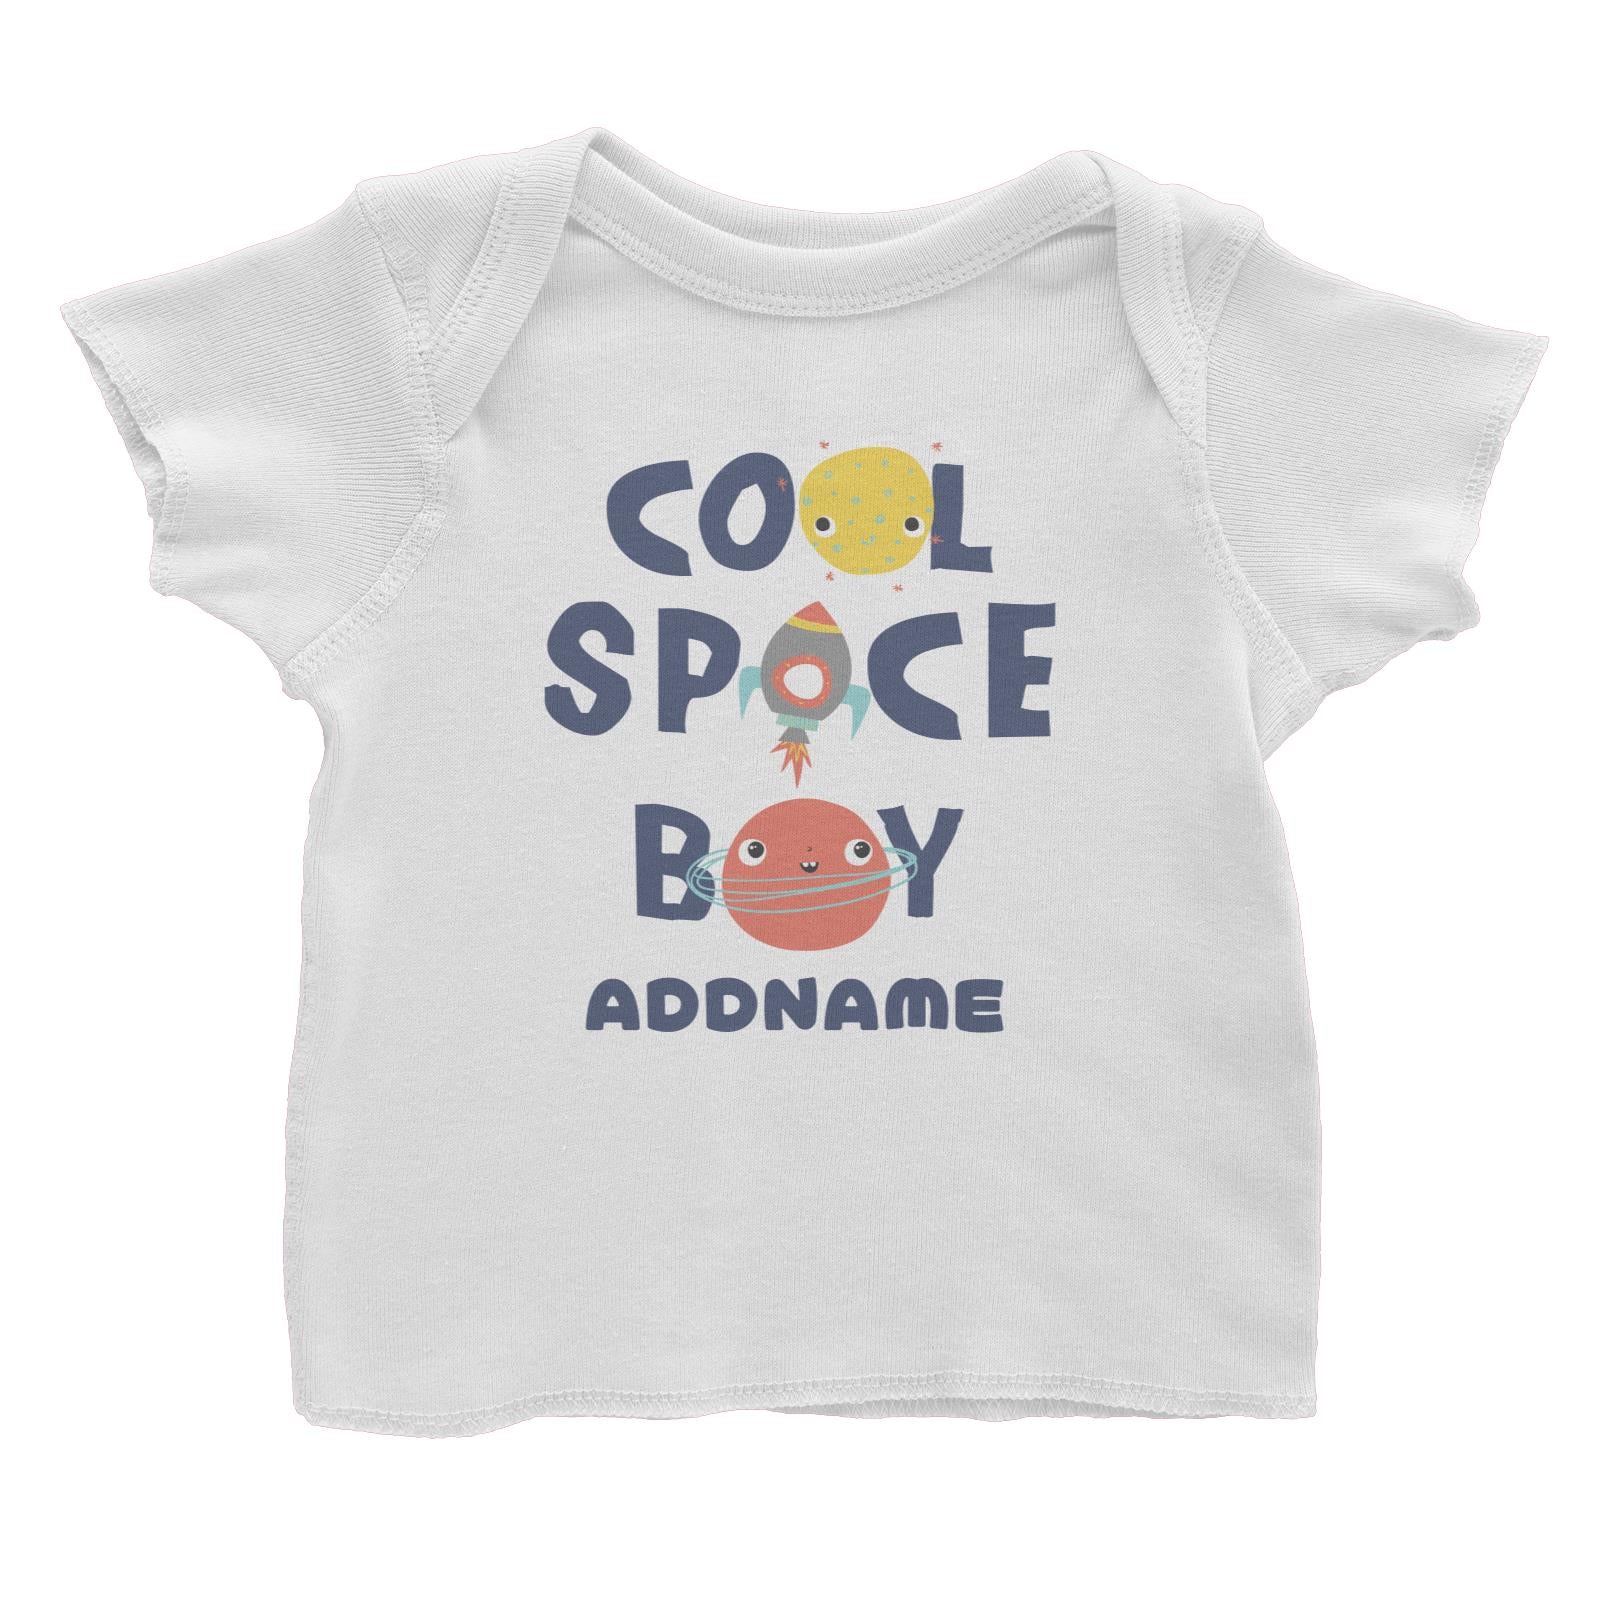 Cool Space Boy Addname Baby T-Shirt